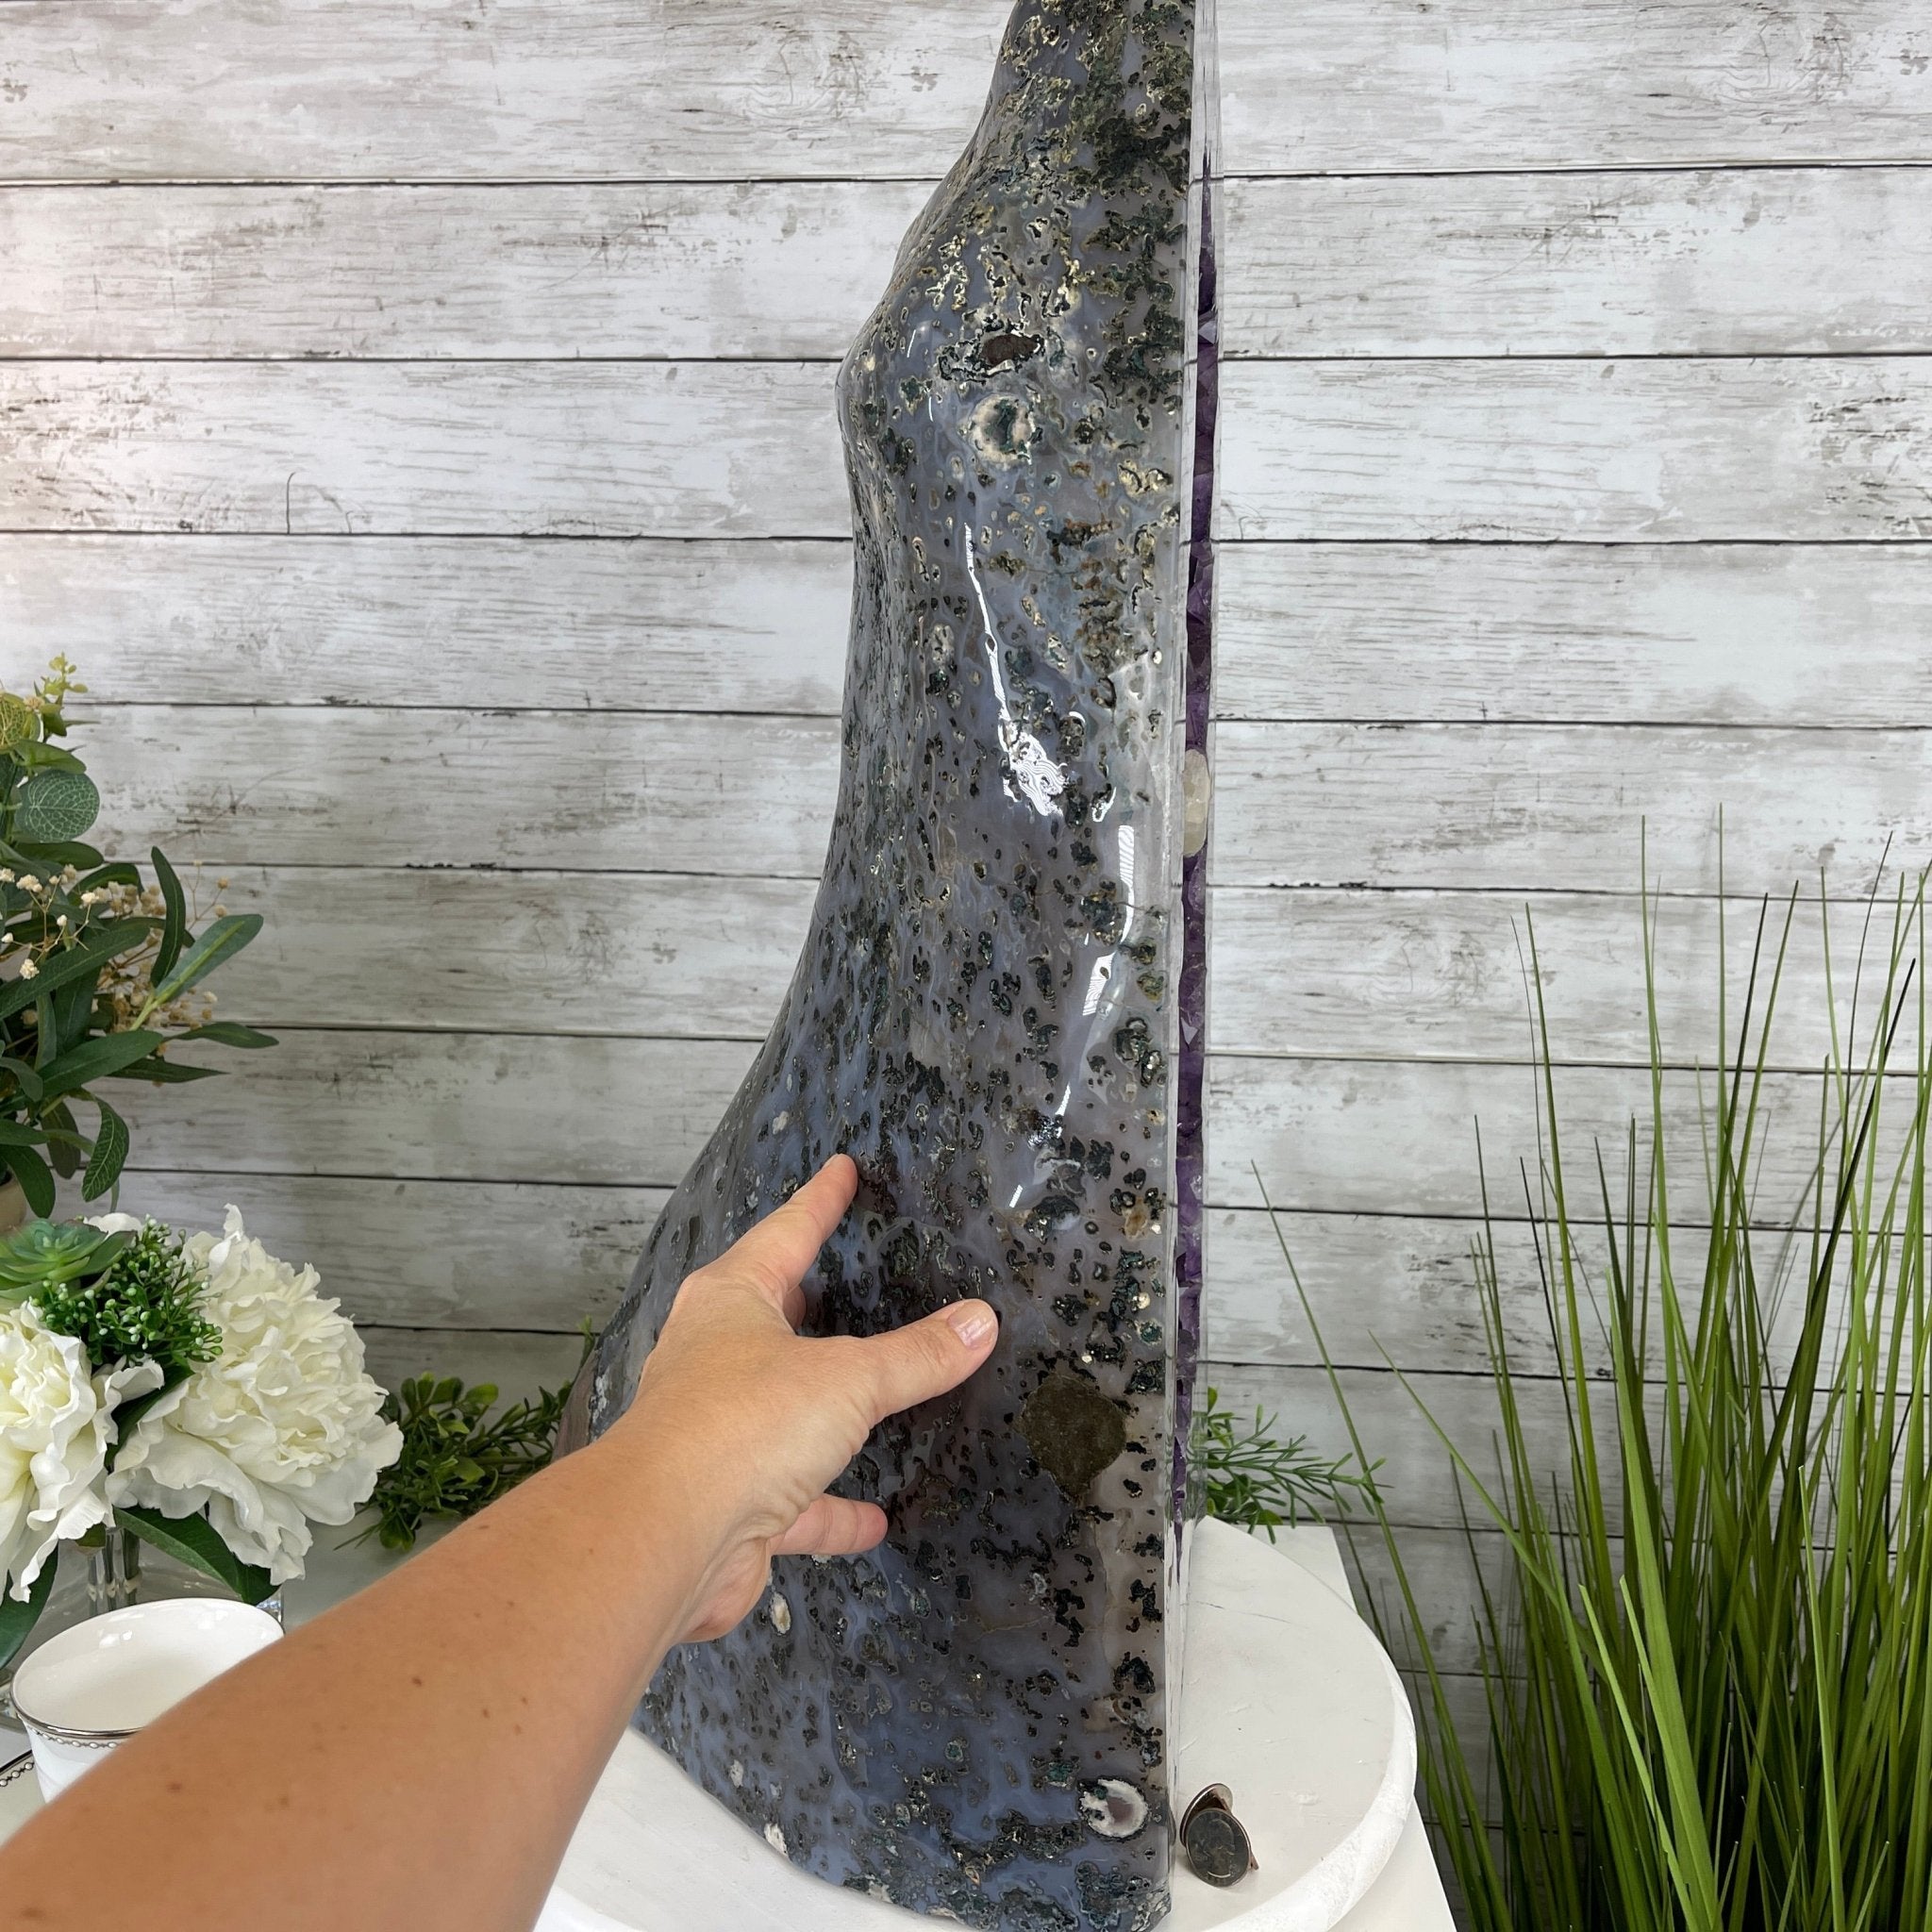 Extra Quality Polished Brazilian Amethyst Cathedral, 95.2 lbs & 24.6" tall Model #5602-0139 by Brazil Gems - Brazil GemsBrazil GemsExtra Quality Polished Brazilian Amethyst Cathedral, 95.2 lbs & 24.6" tall Model #5602-0139 by Brazil GemsPolished Cathedrals5602-0139